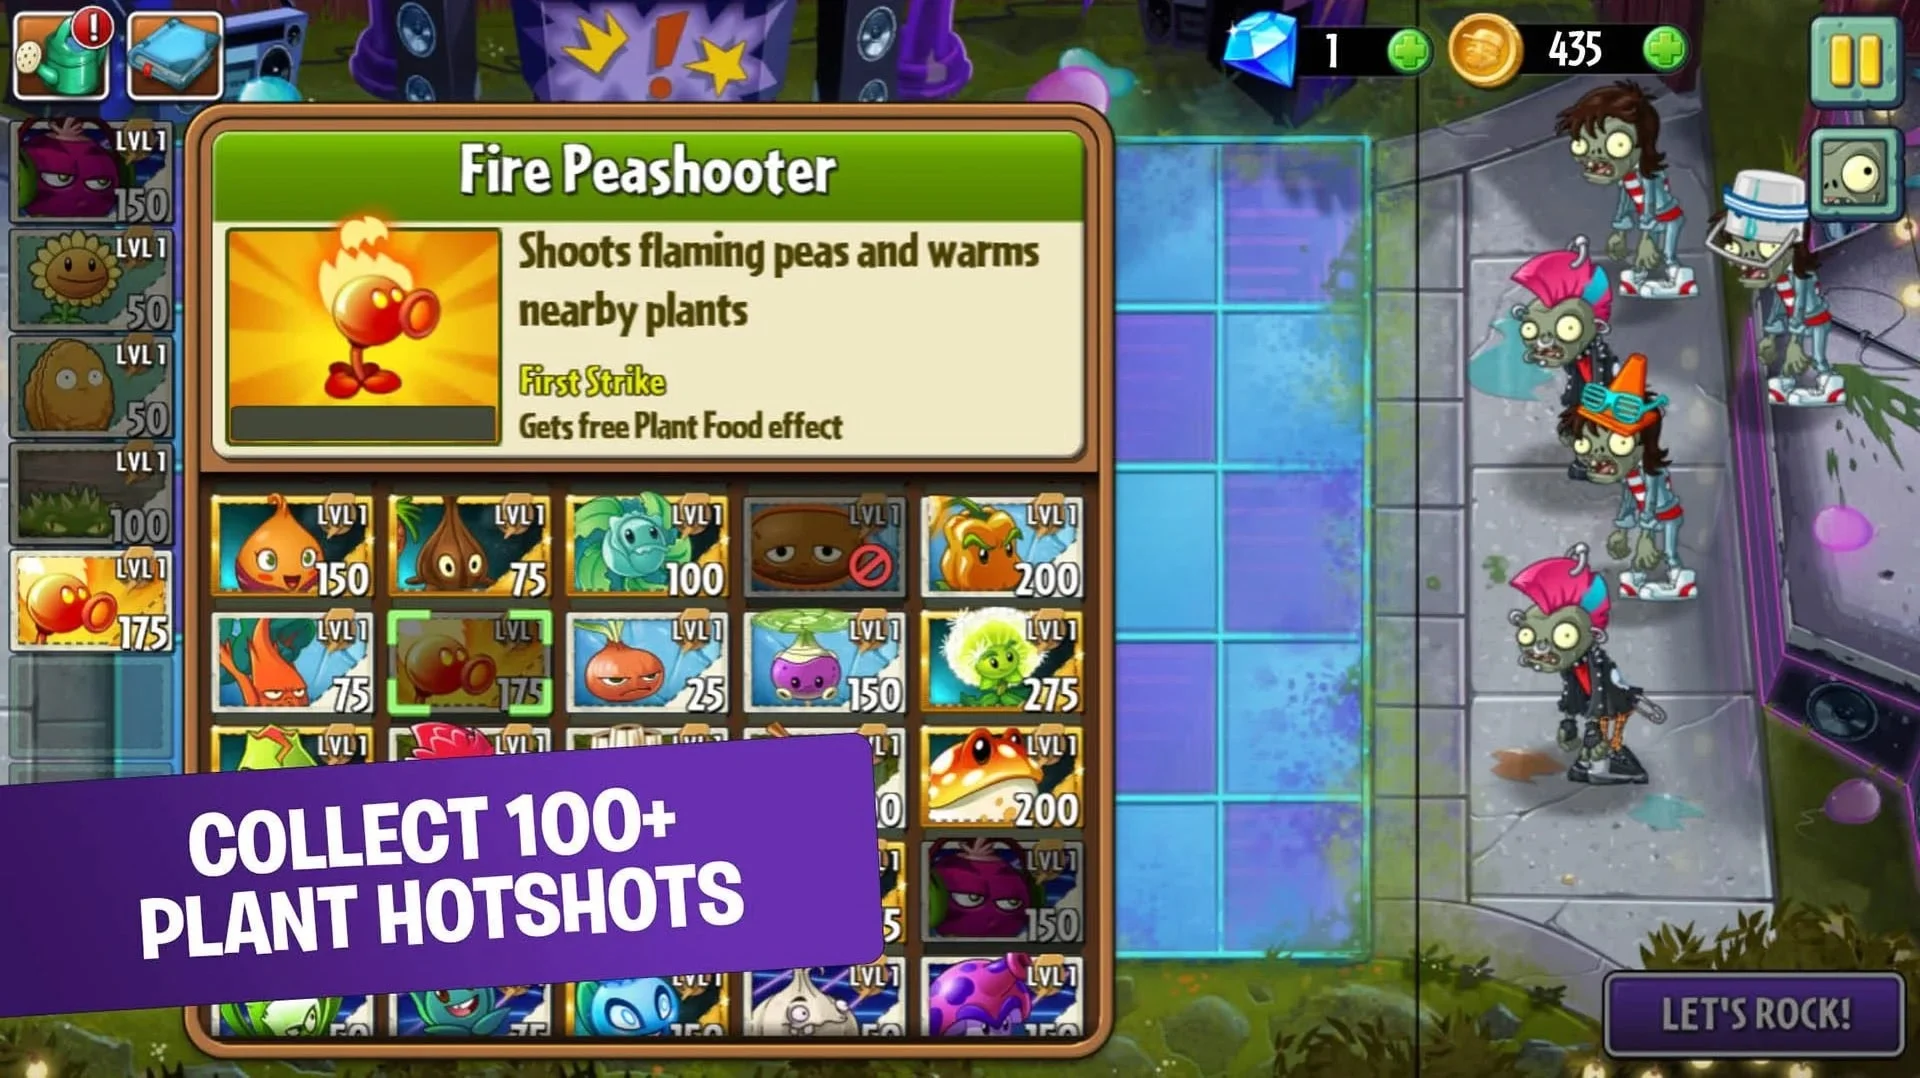 Plants Vs Zombies Apk Full Version Is here